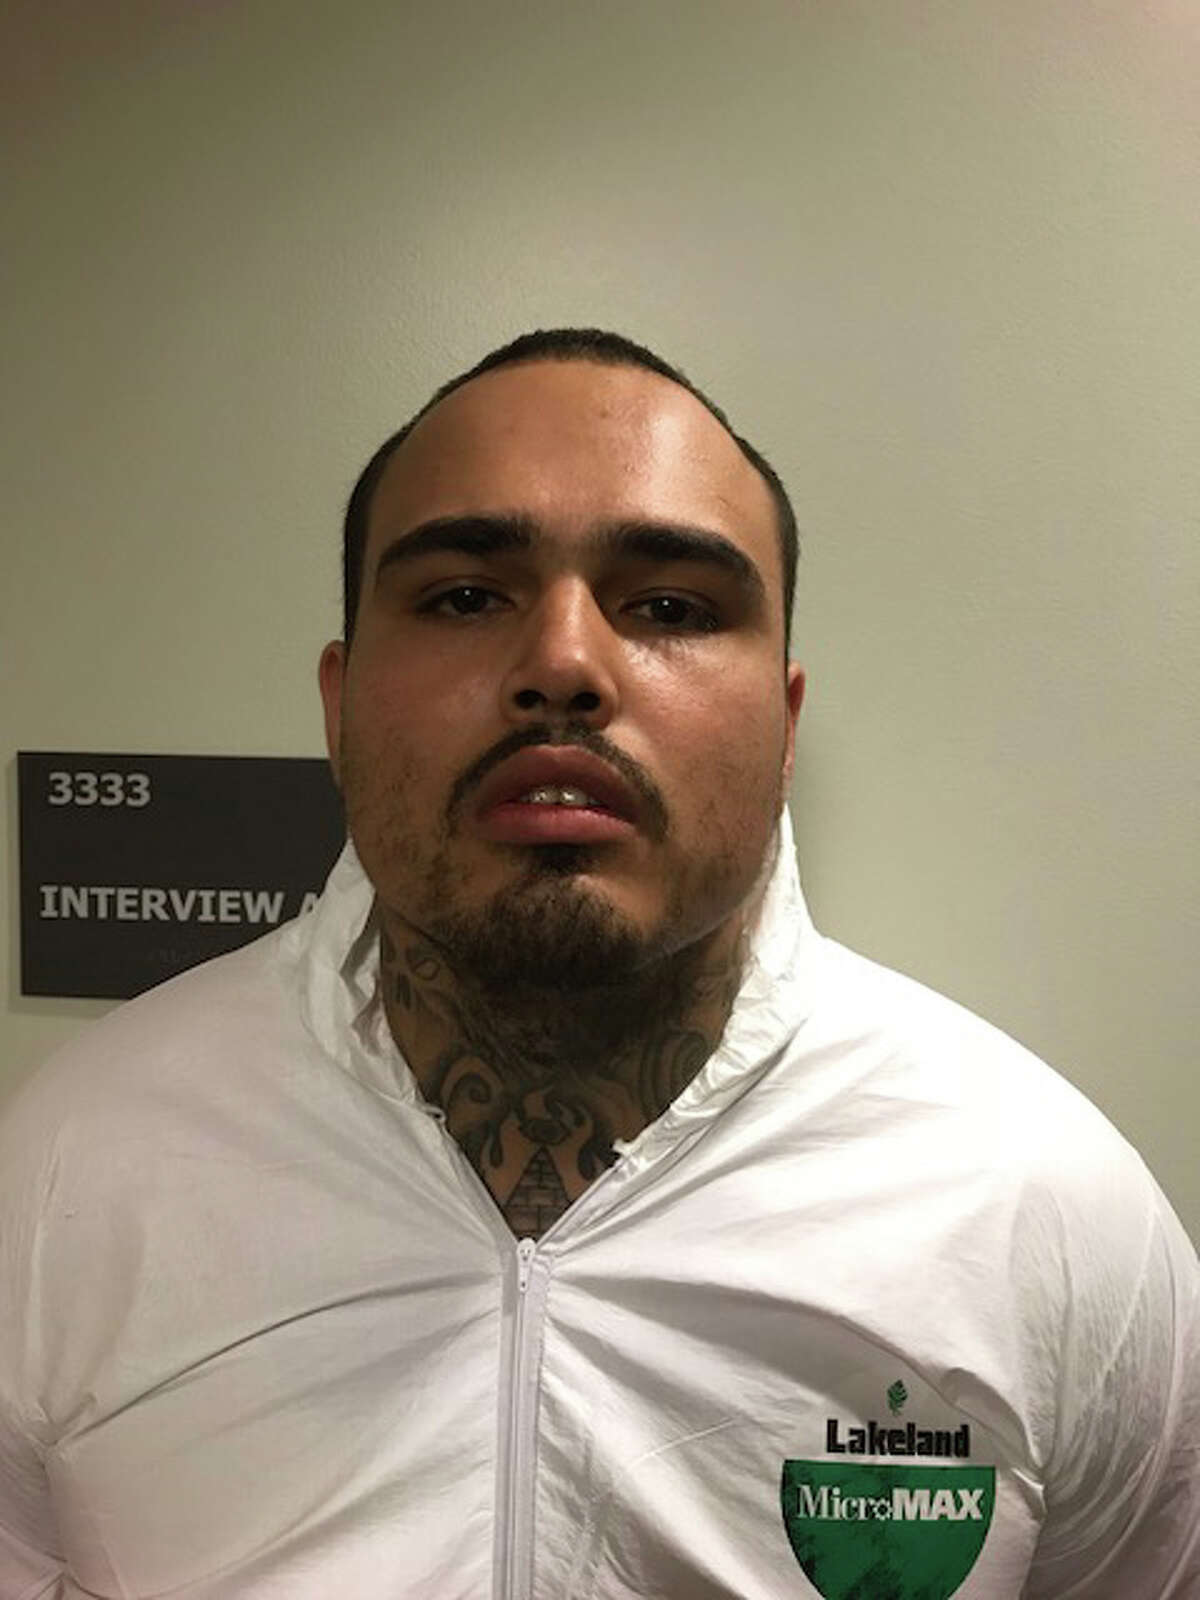 Jonathan Winston Johnson, 25, will face charges of capital murder related to a shooting on Feb. 5, 2019.